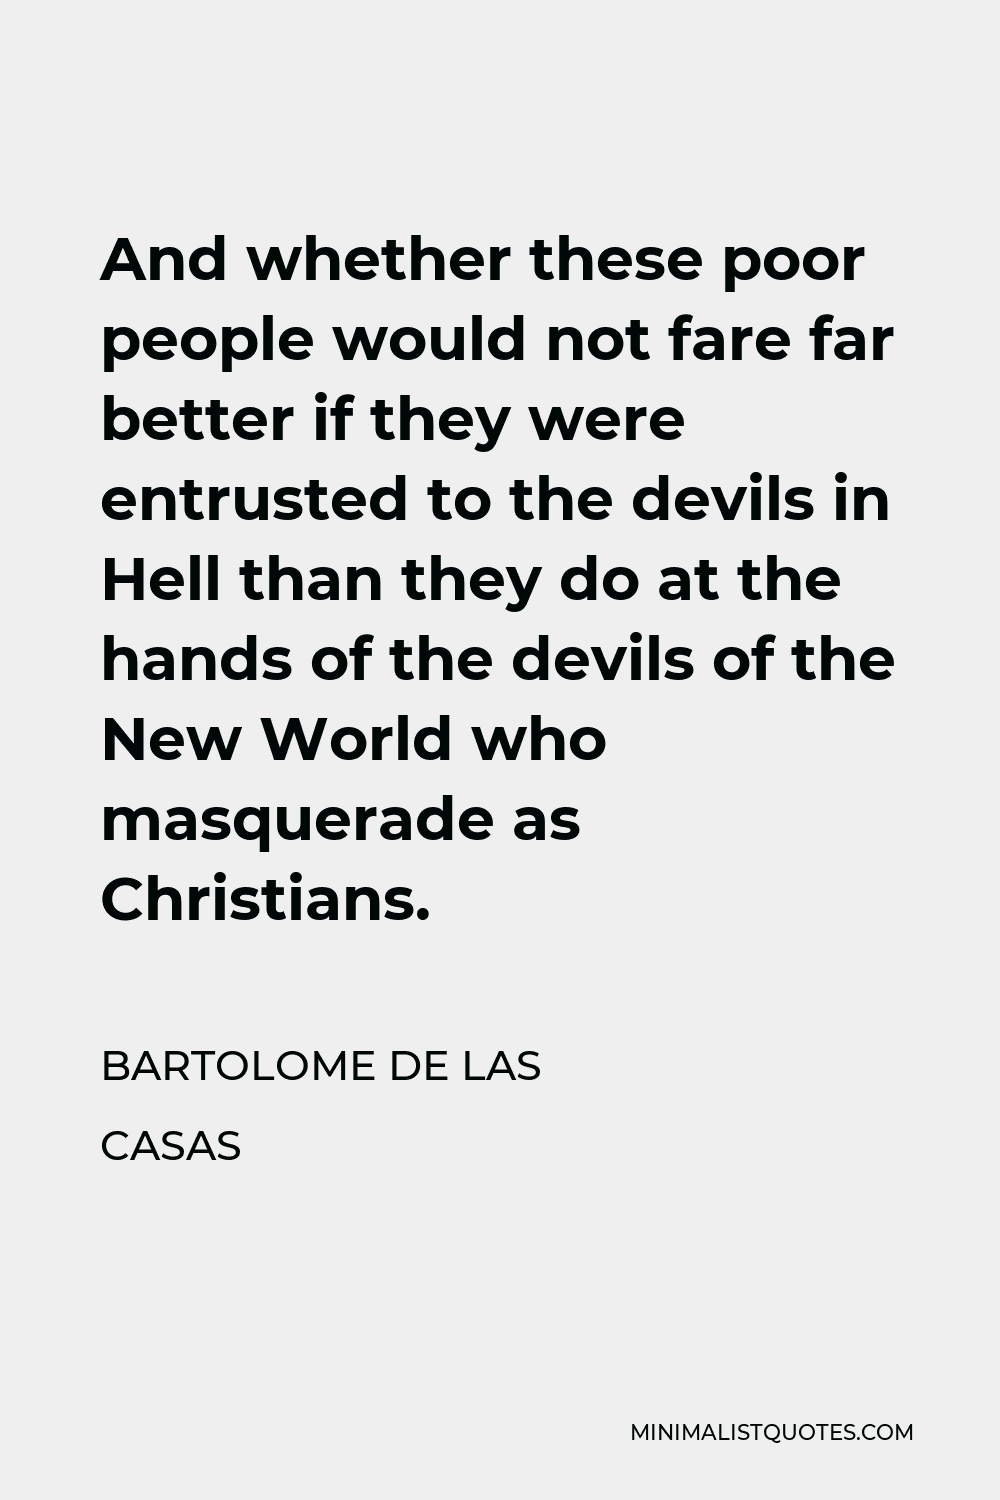 Bartolome de las Casas Quote - And whether these poor people would not fare far better if they were entrusted to the devils in Hell than they do at the hands of the devils of the New World who masquerade as Christians.